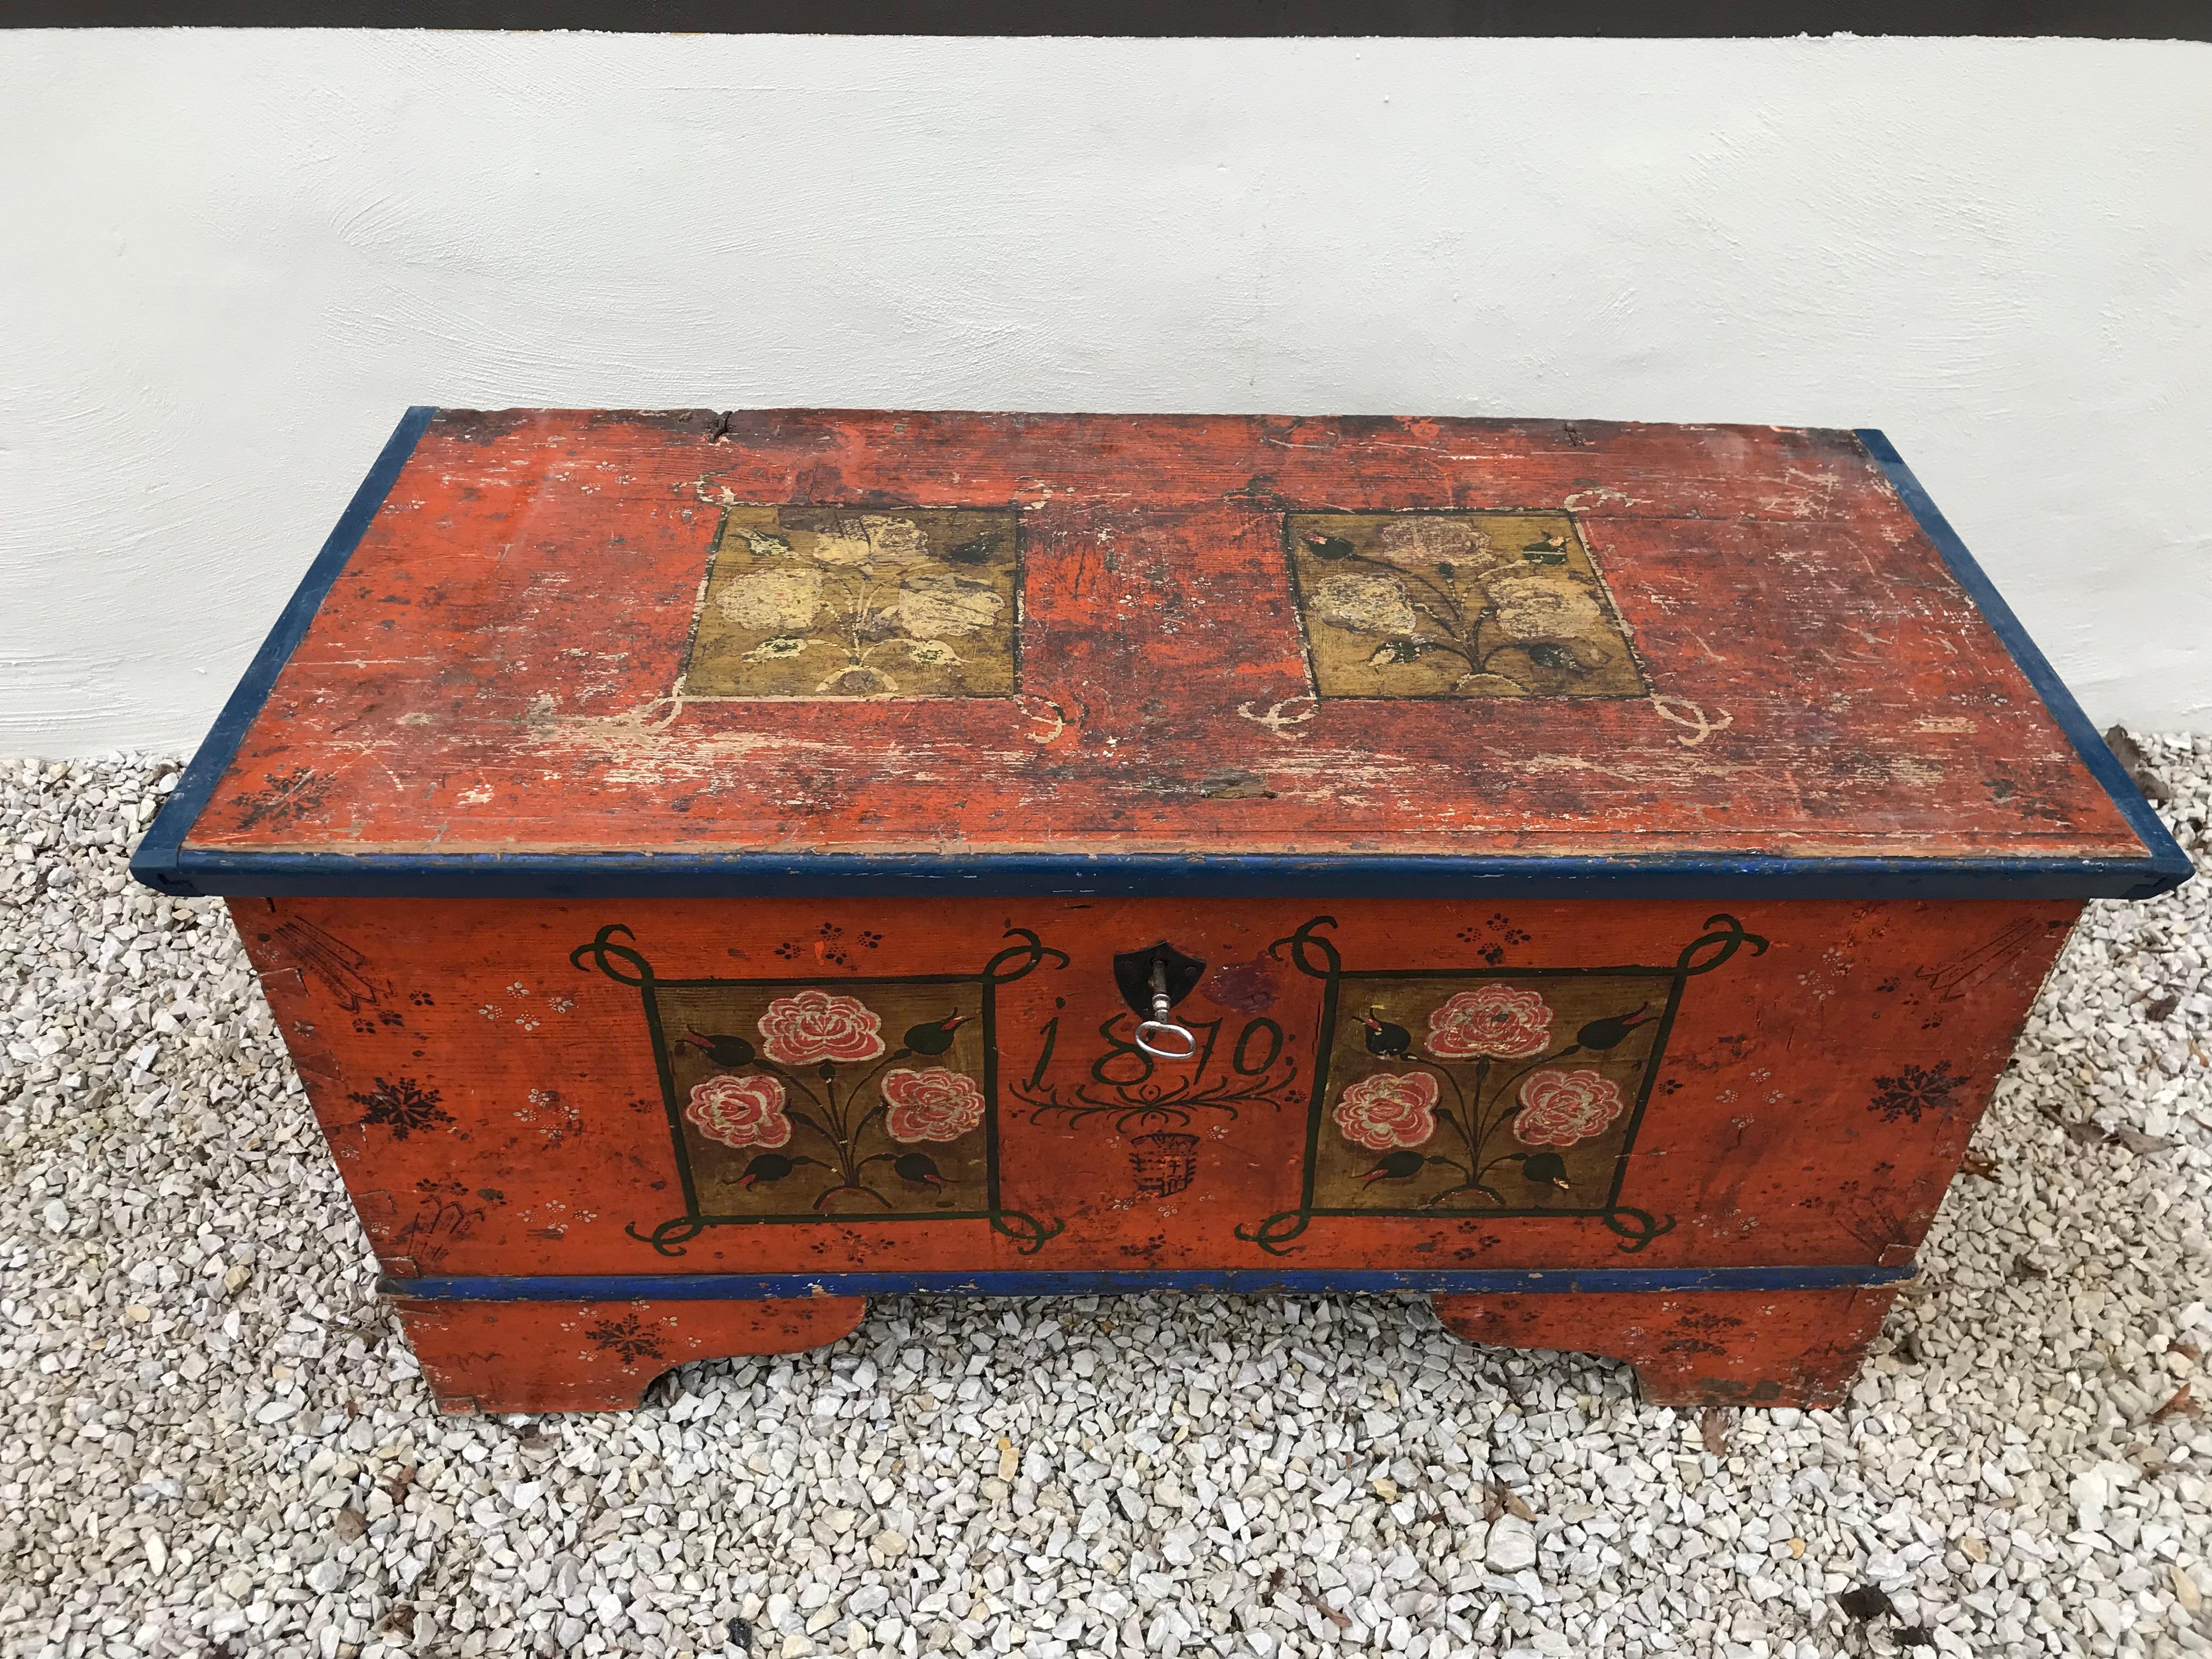 This painted chest comes from Slovakia, year 1870